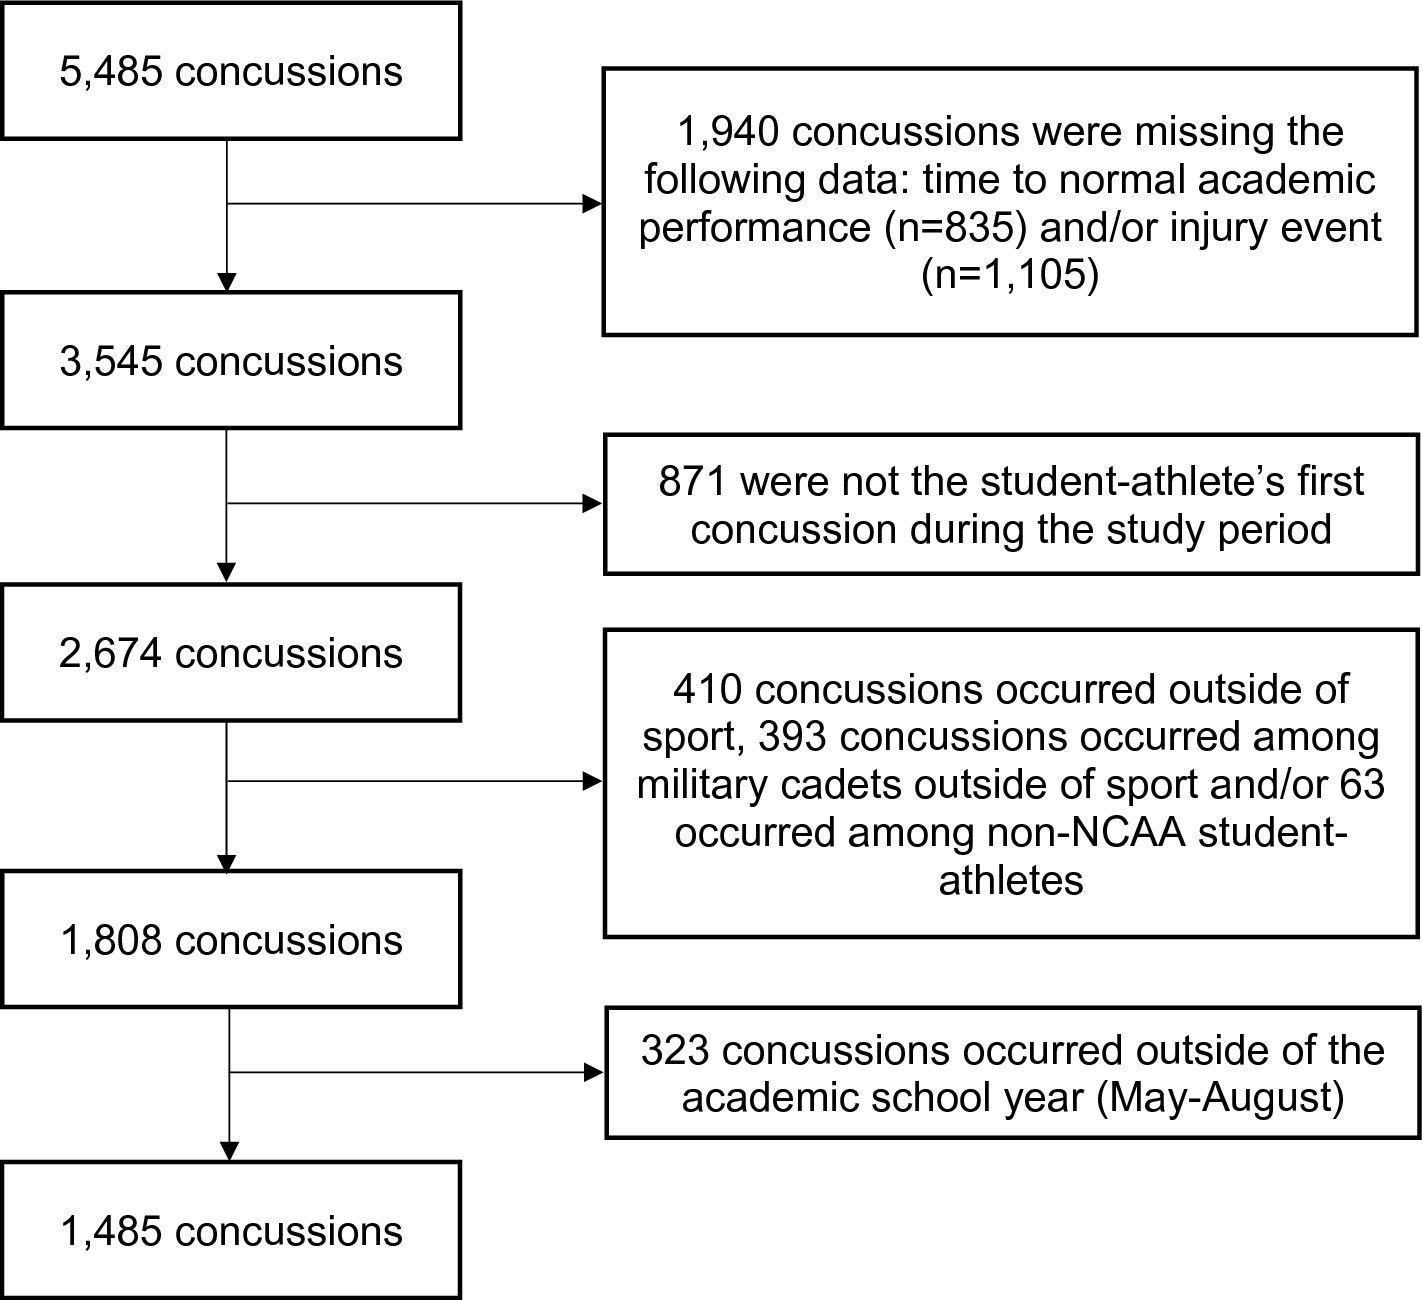 Factors Influencing Time to Return to Learn Among NCAA Student-Athletes Enrolled in the Concussion Assessment, Research, and Education (CARE) Study